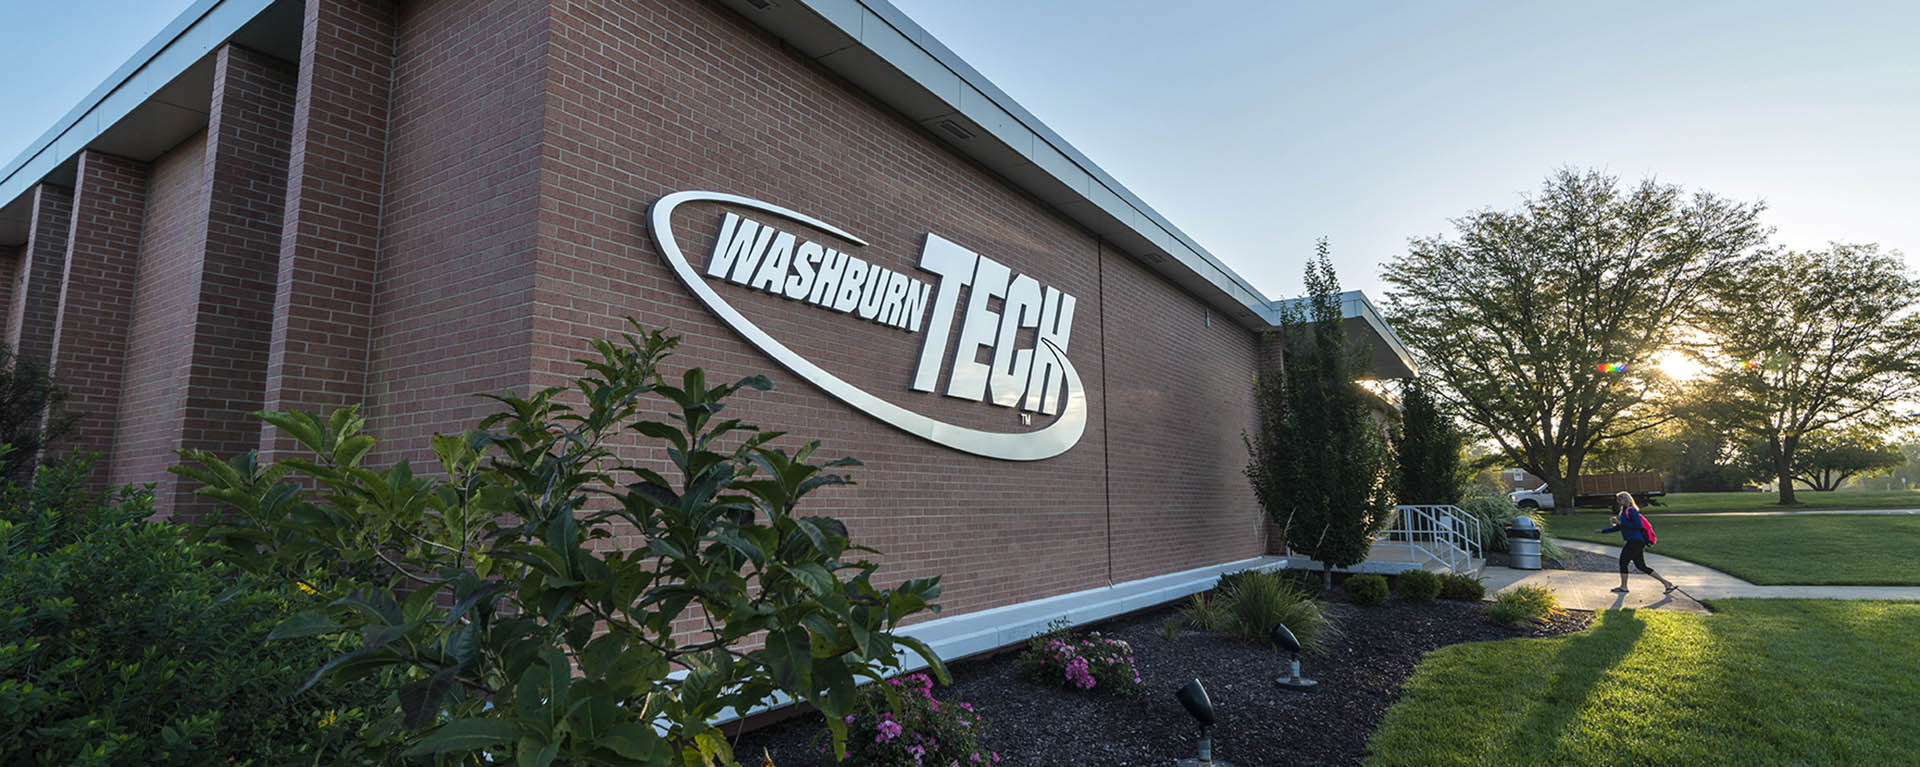 Washburn tech sign on building with woman walking into building.